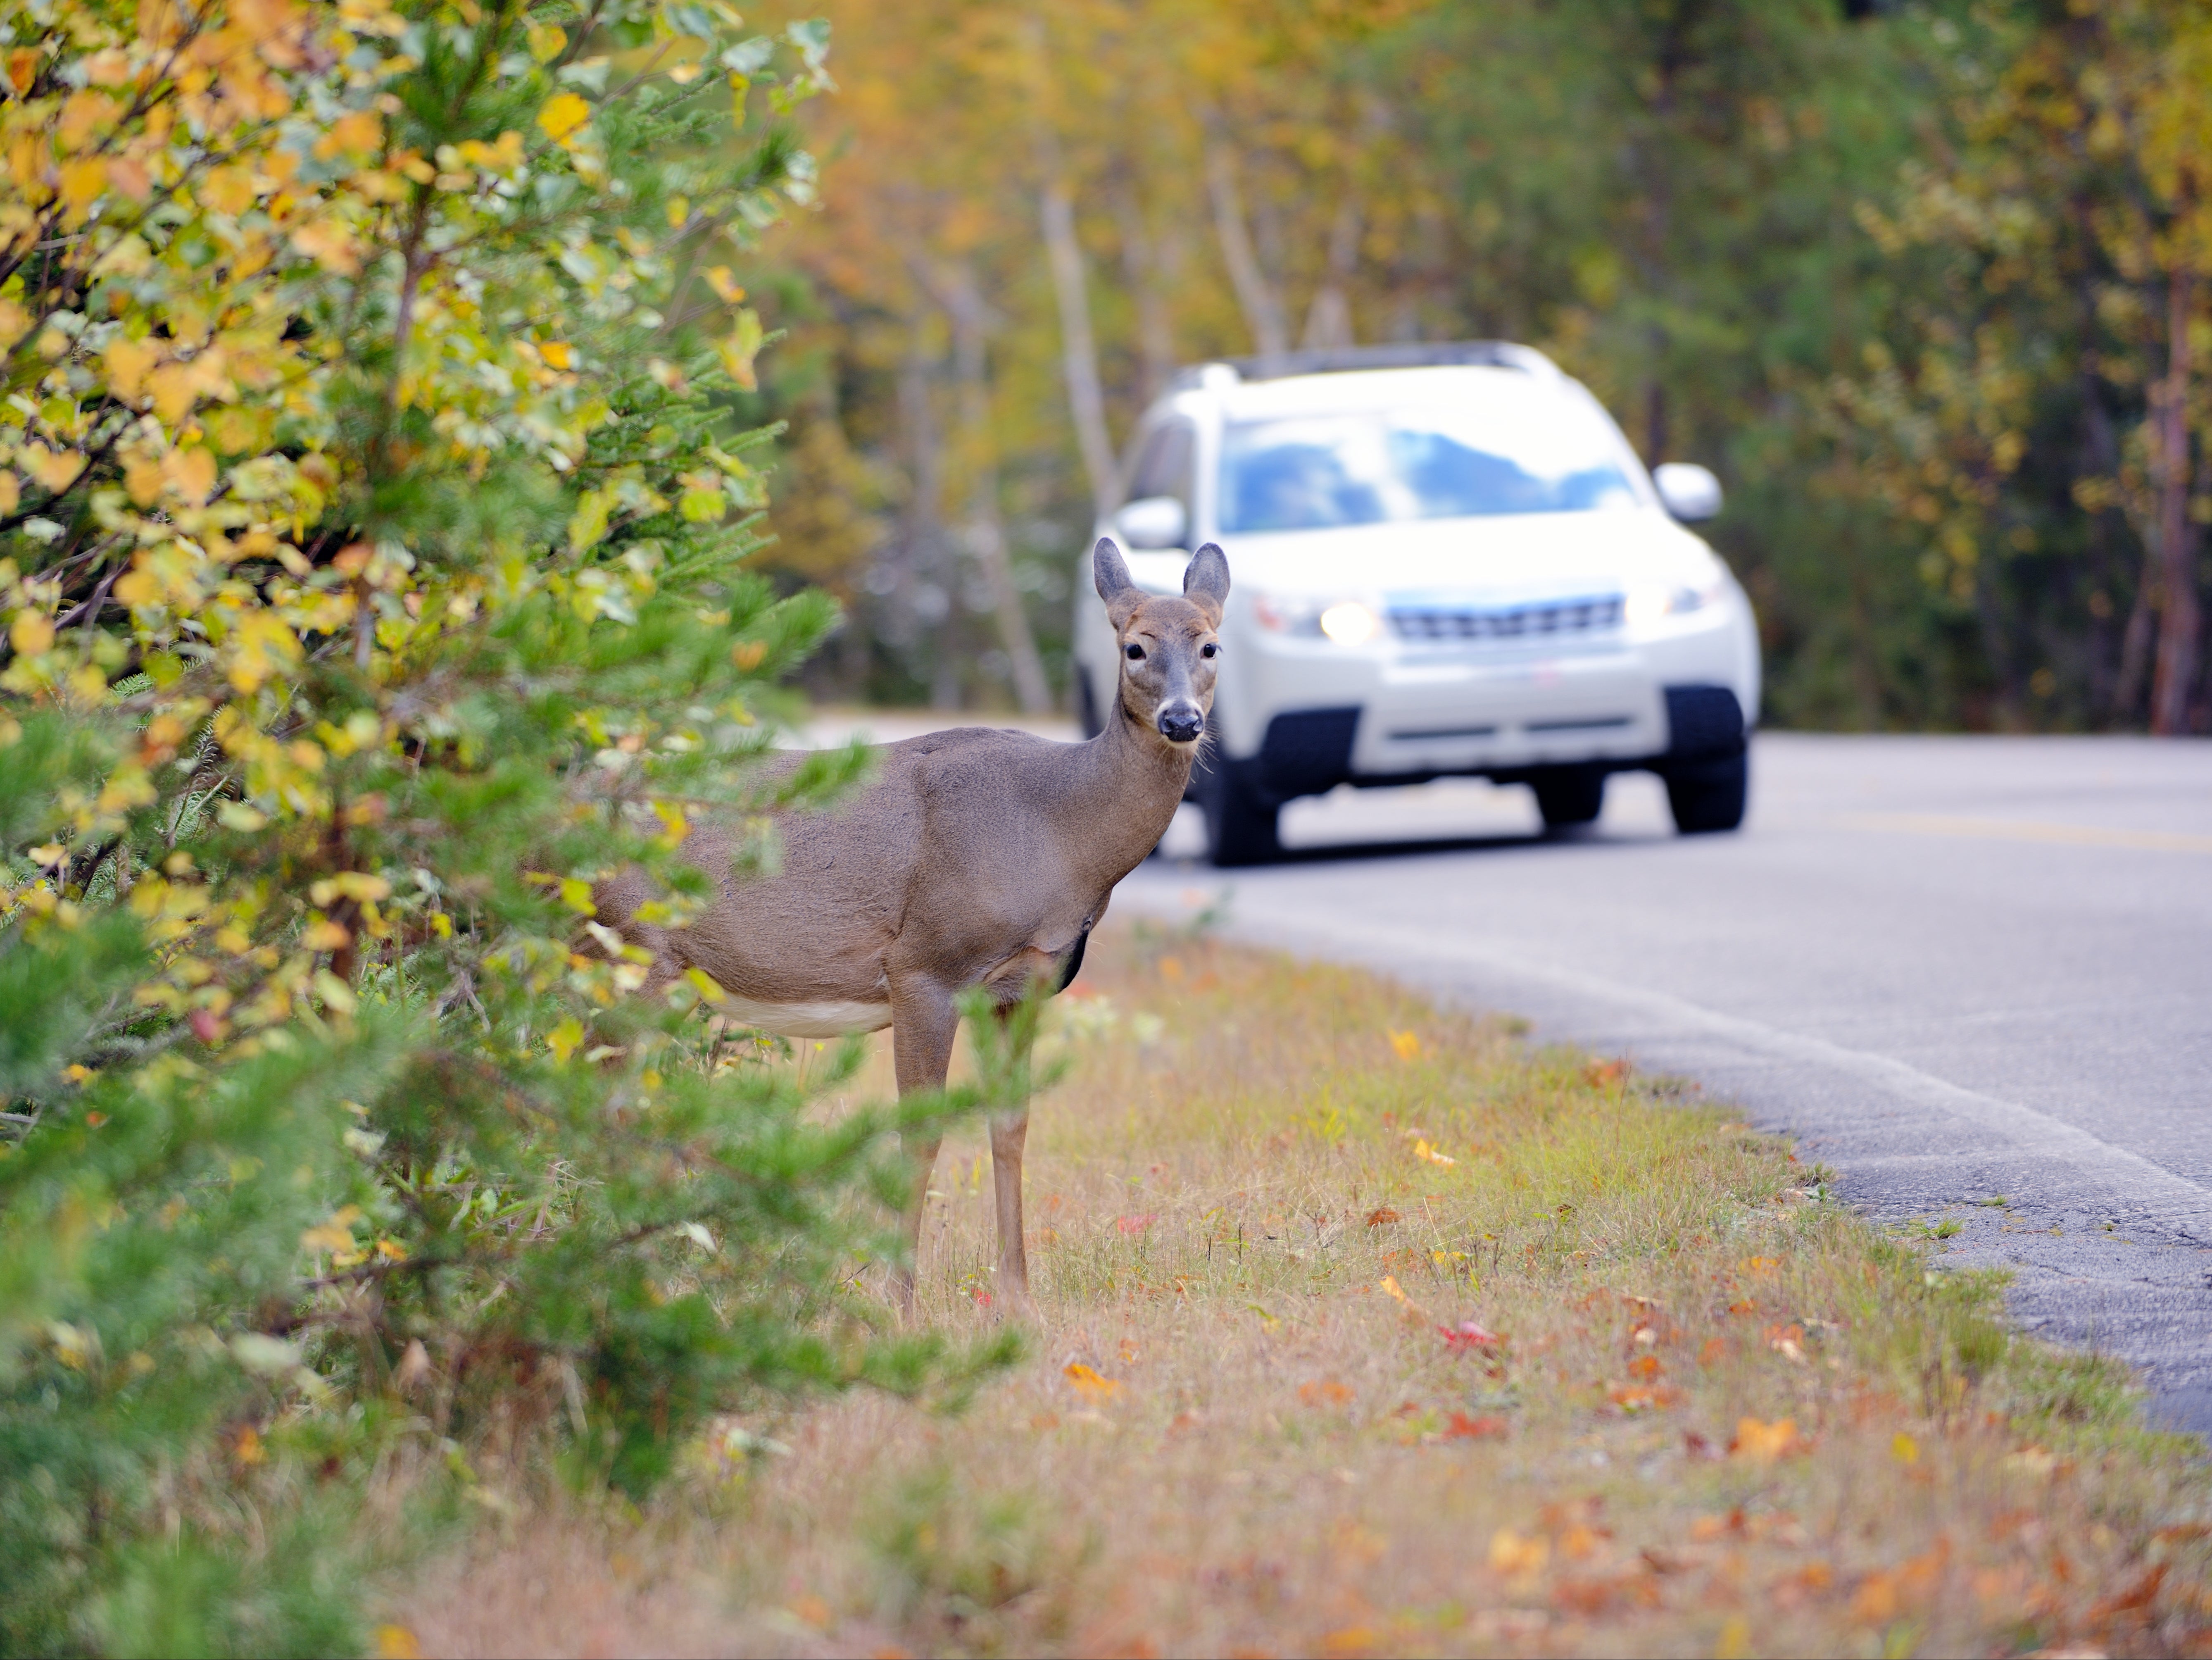 Moving clocks forward can reduce deer-vehicle collisions by 16 per cent